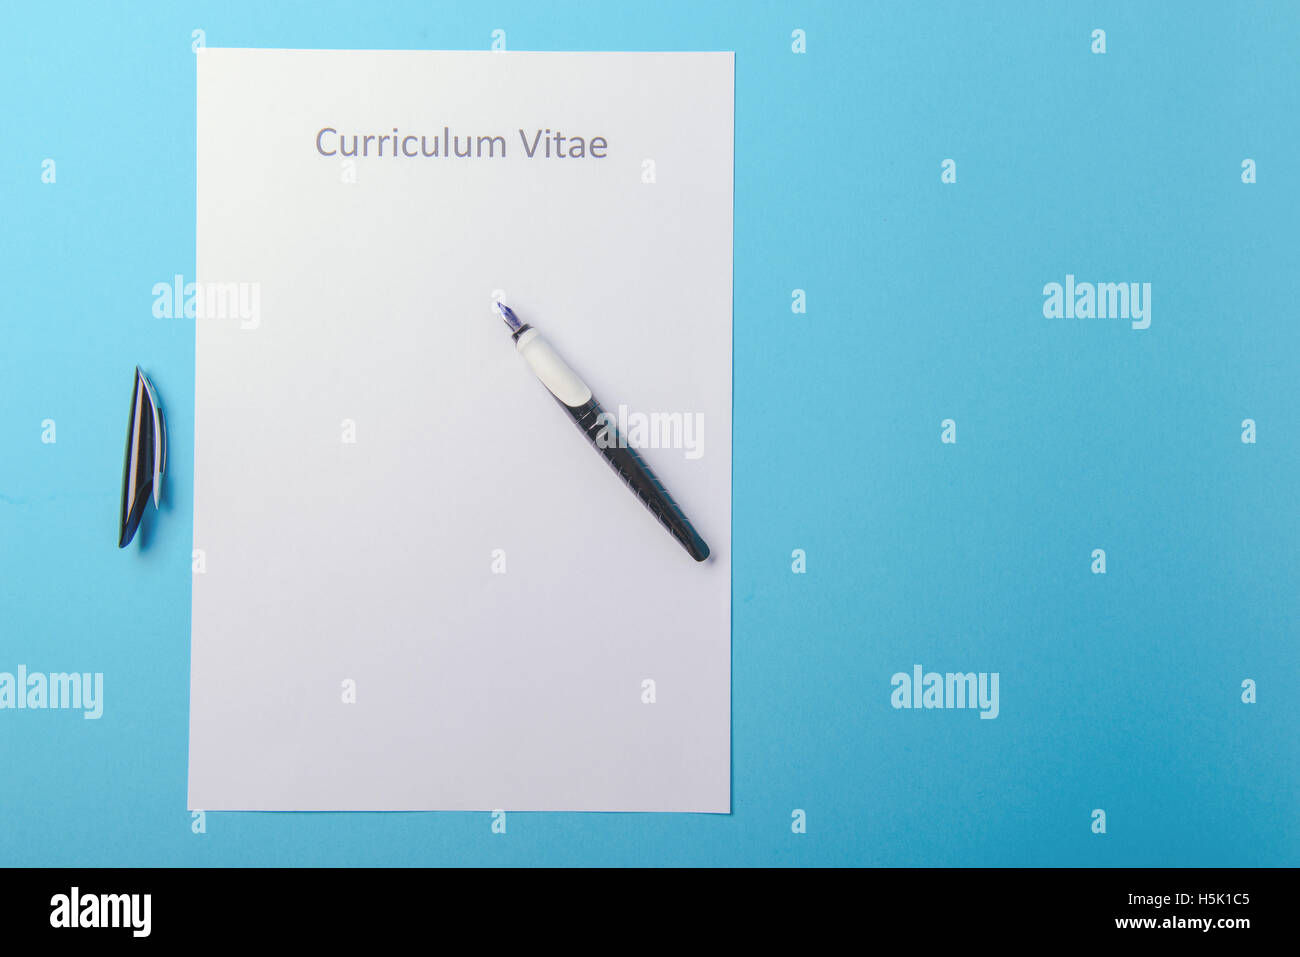 Curriculum Vitae Written On An Blank White Paper On Blue Background